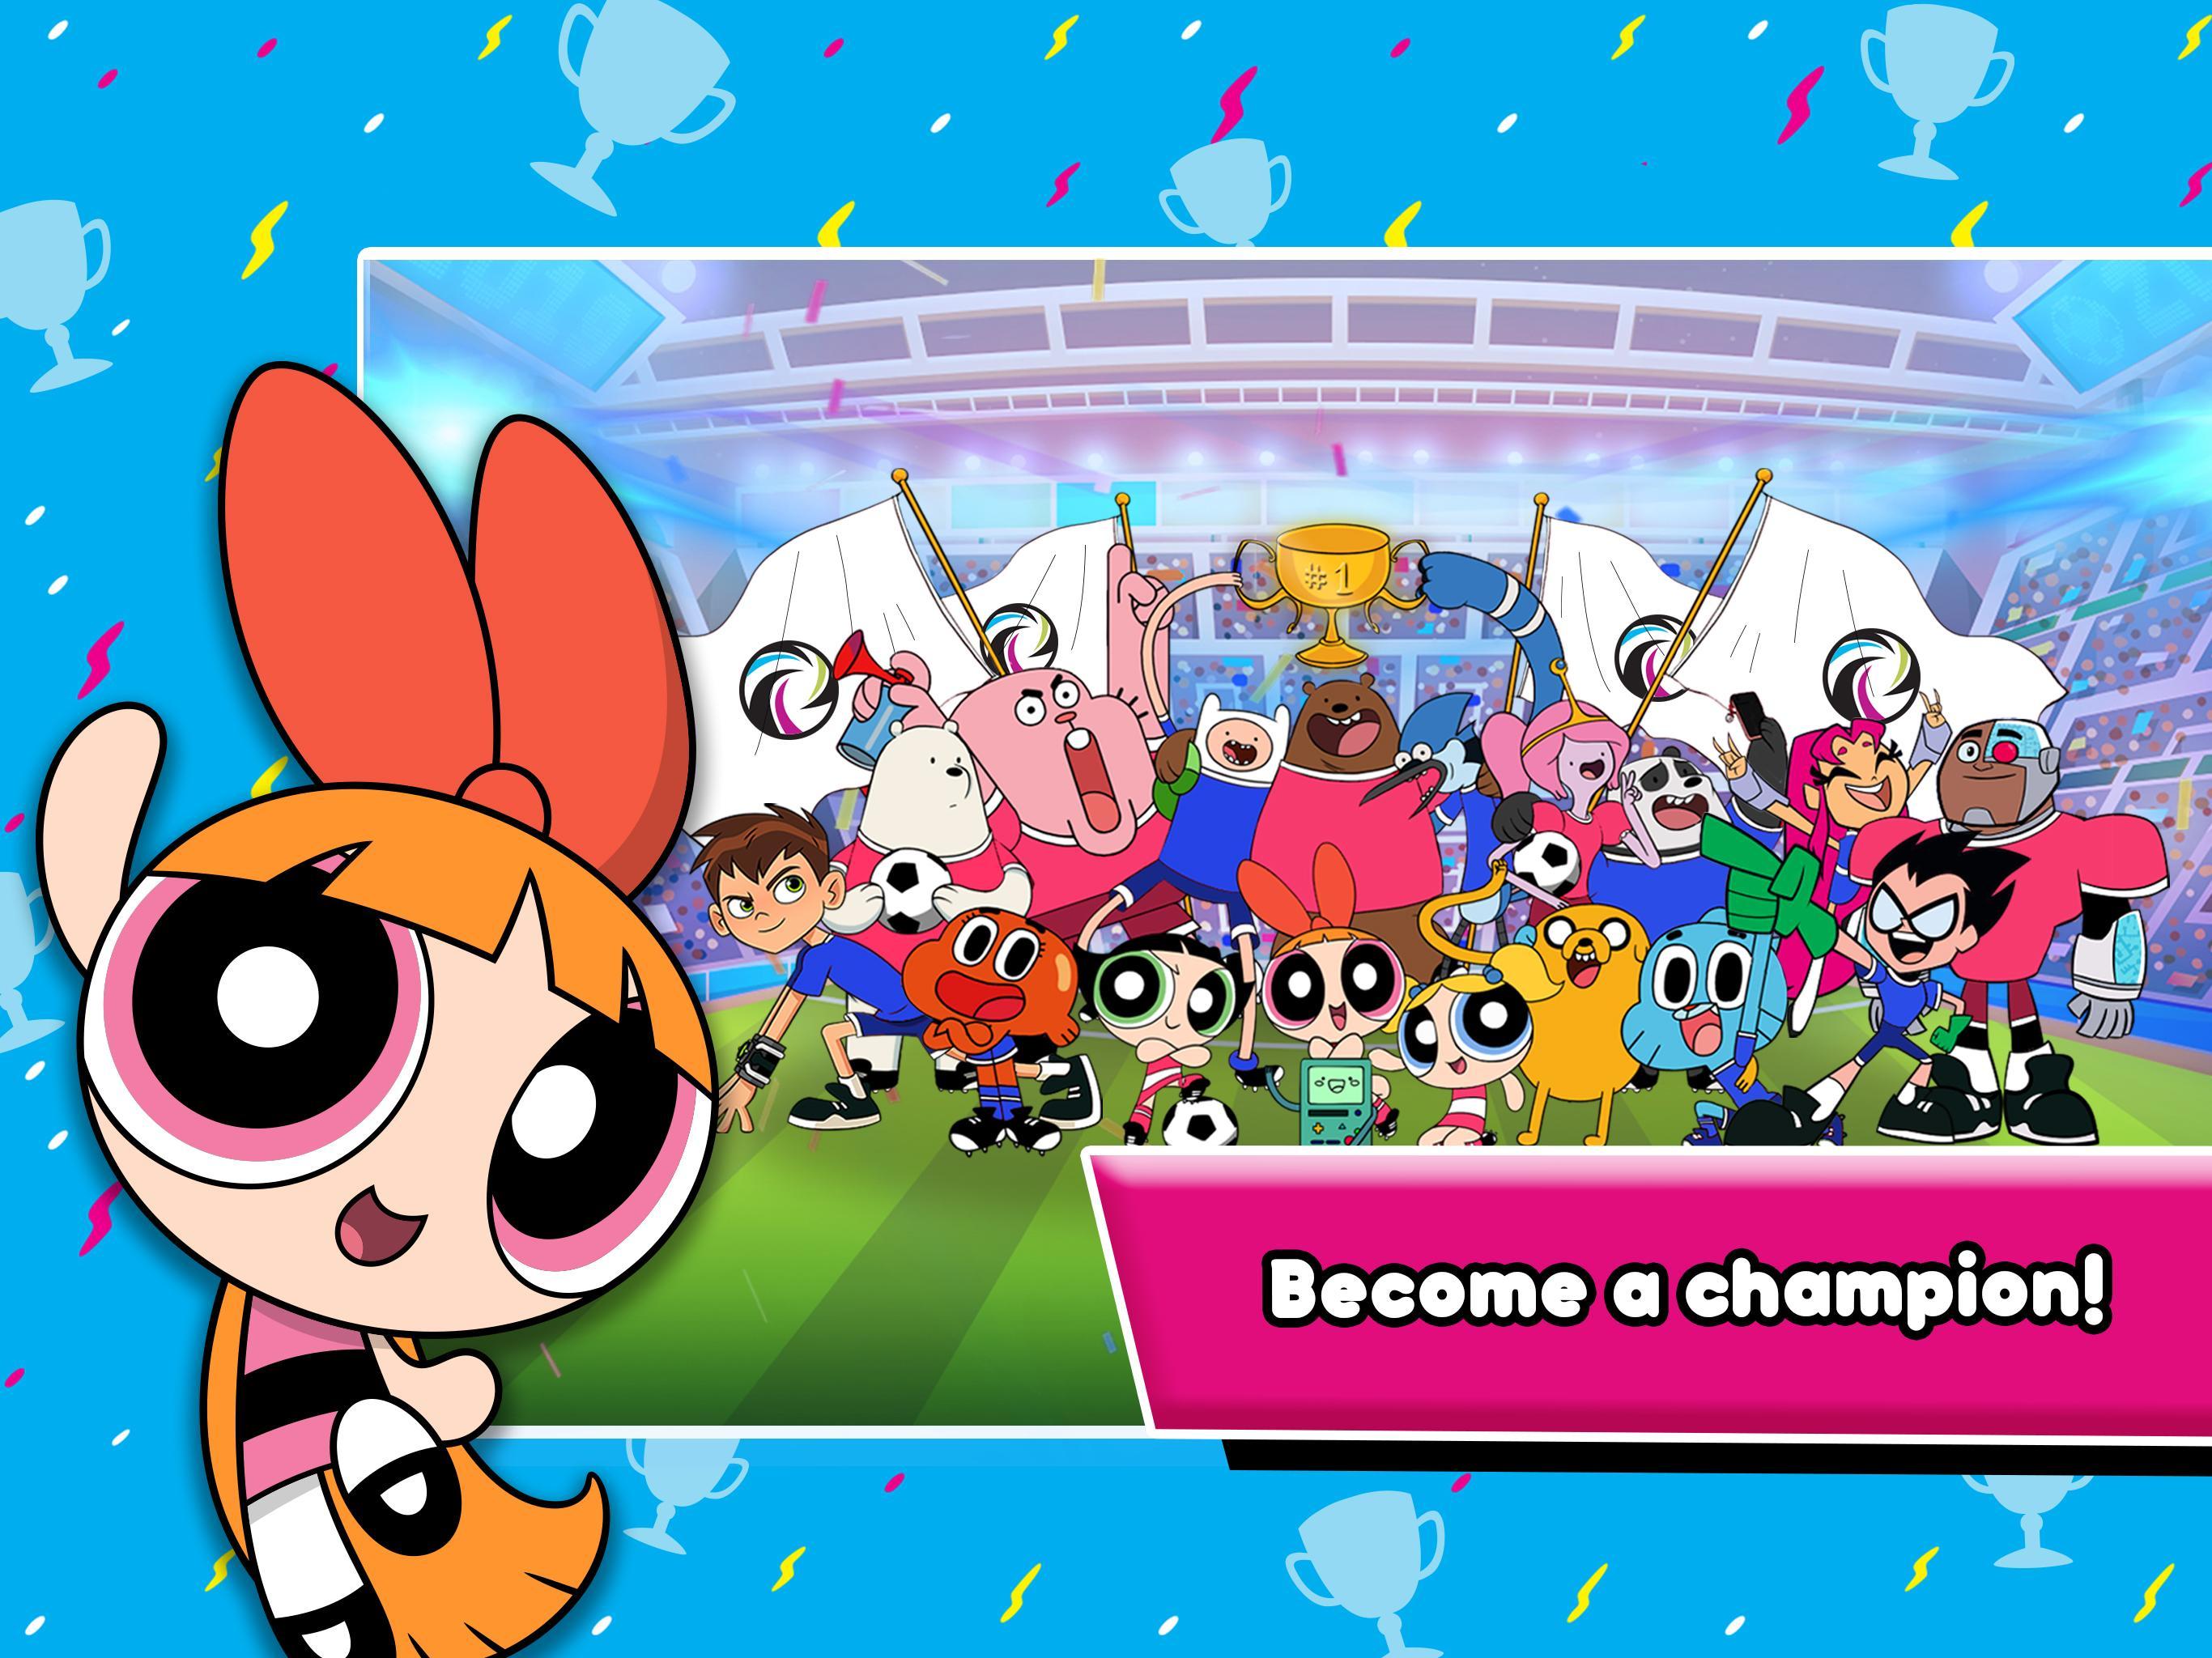 Toon Cup Cartoon  Network  s Soccer Game  for Android APK 